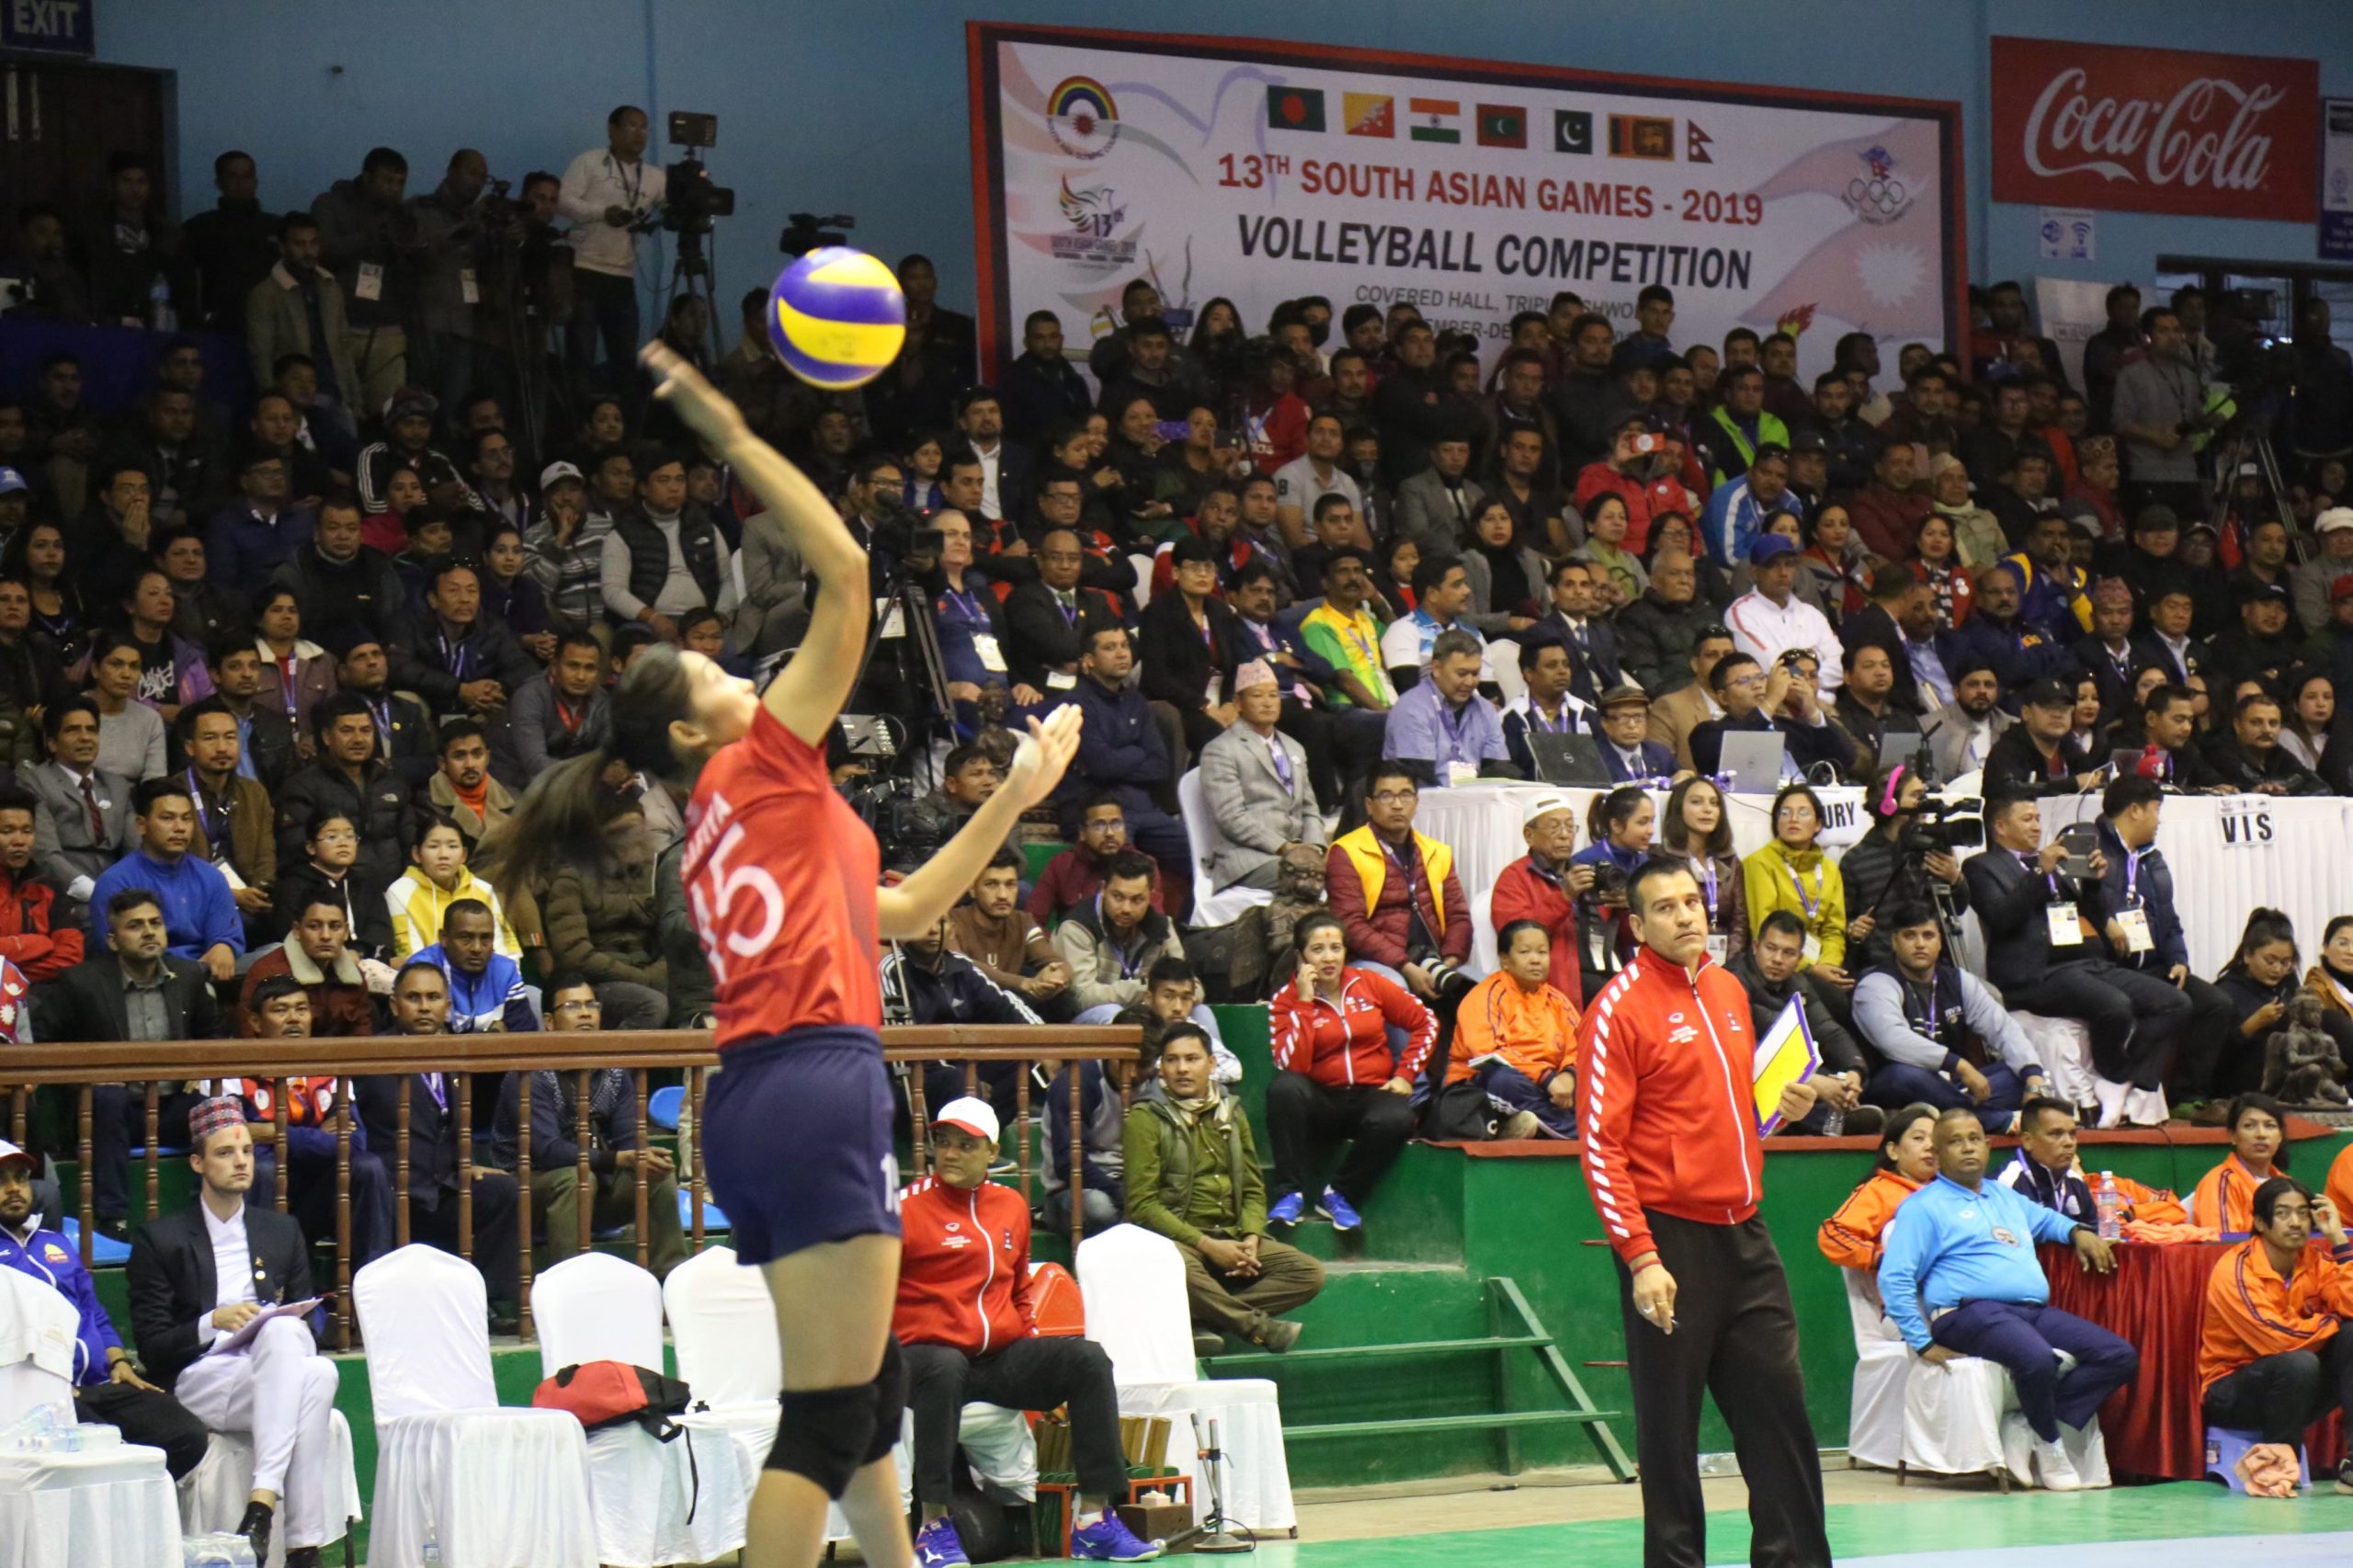 SAG 2019: Nepal limits to silver medal in women’s volleyball